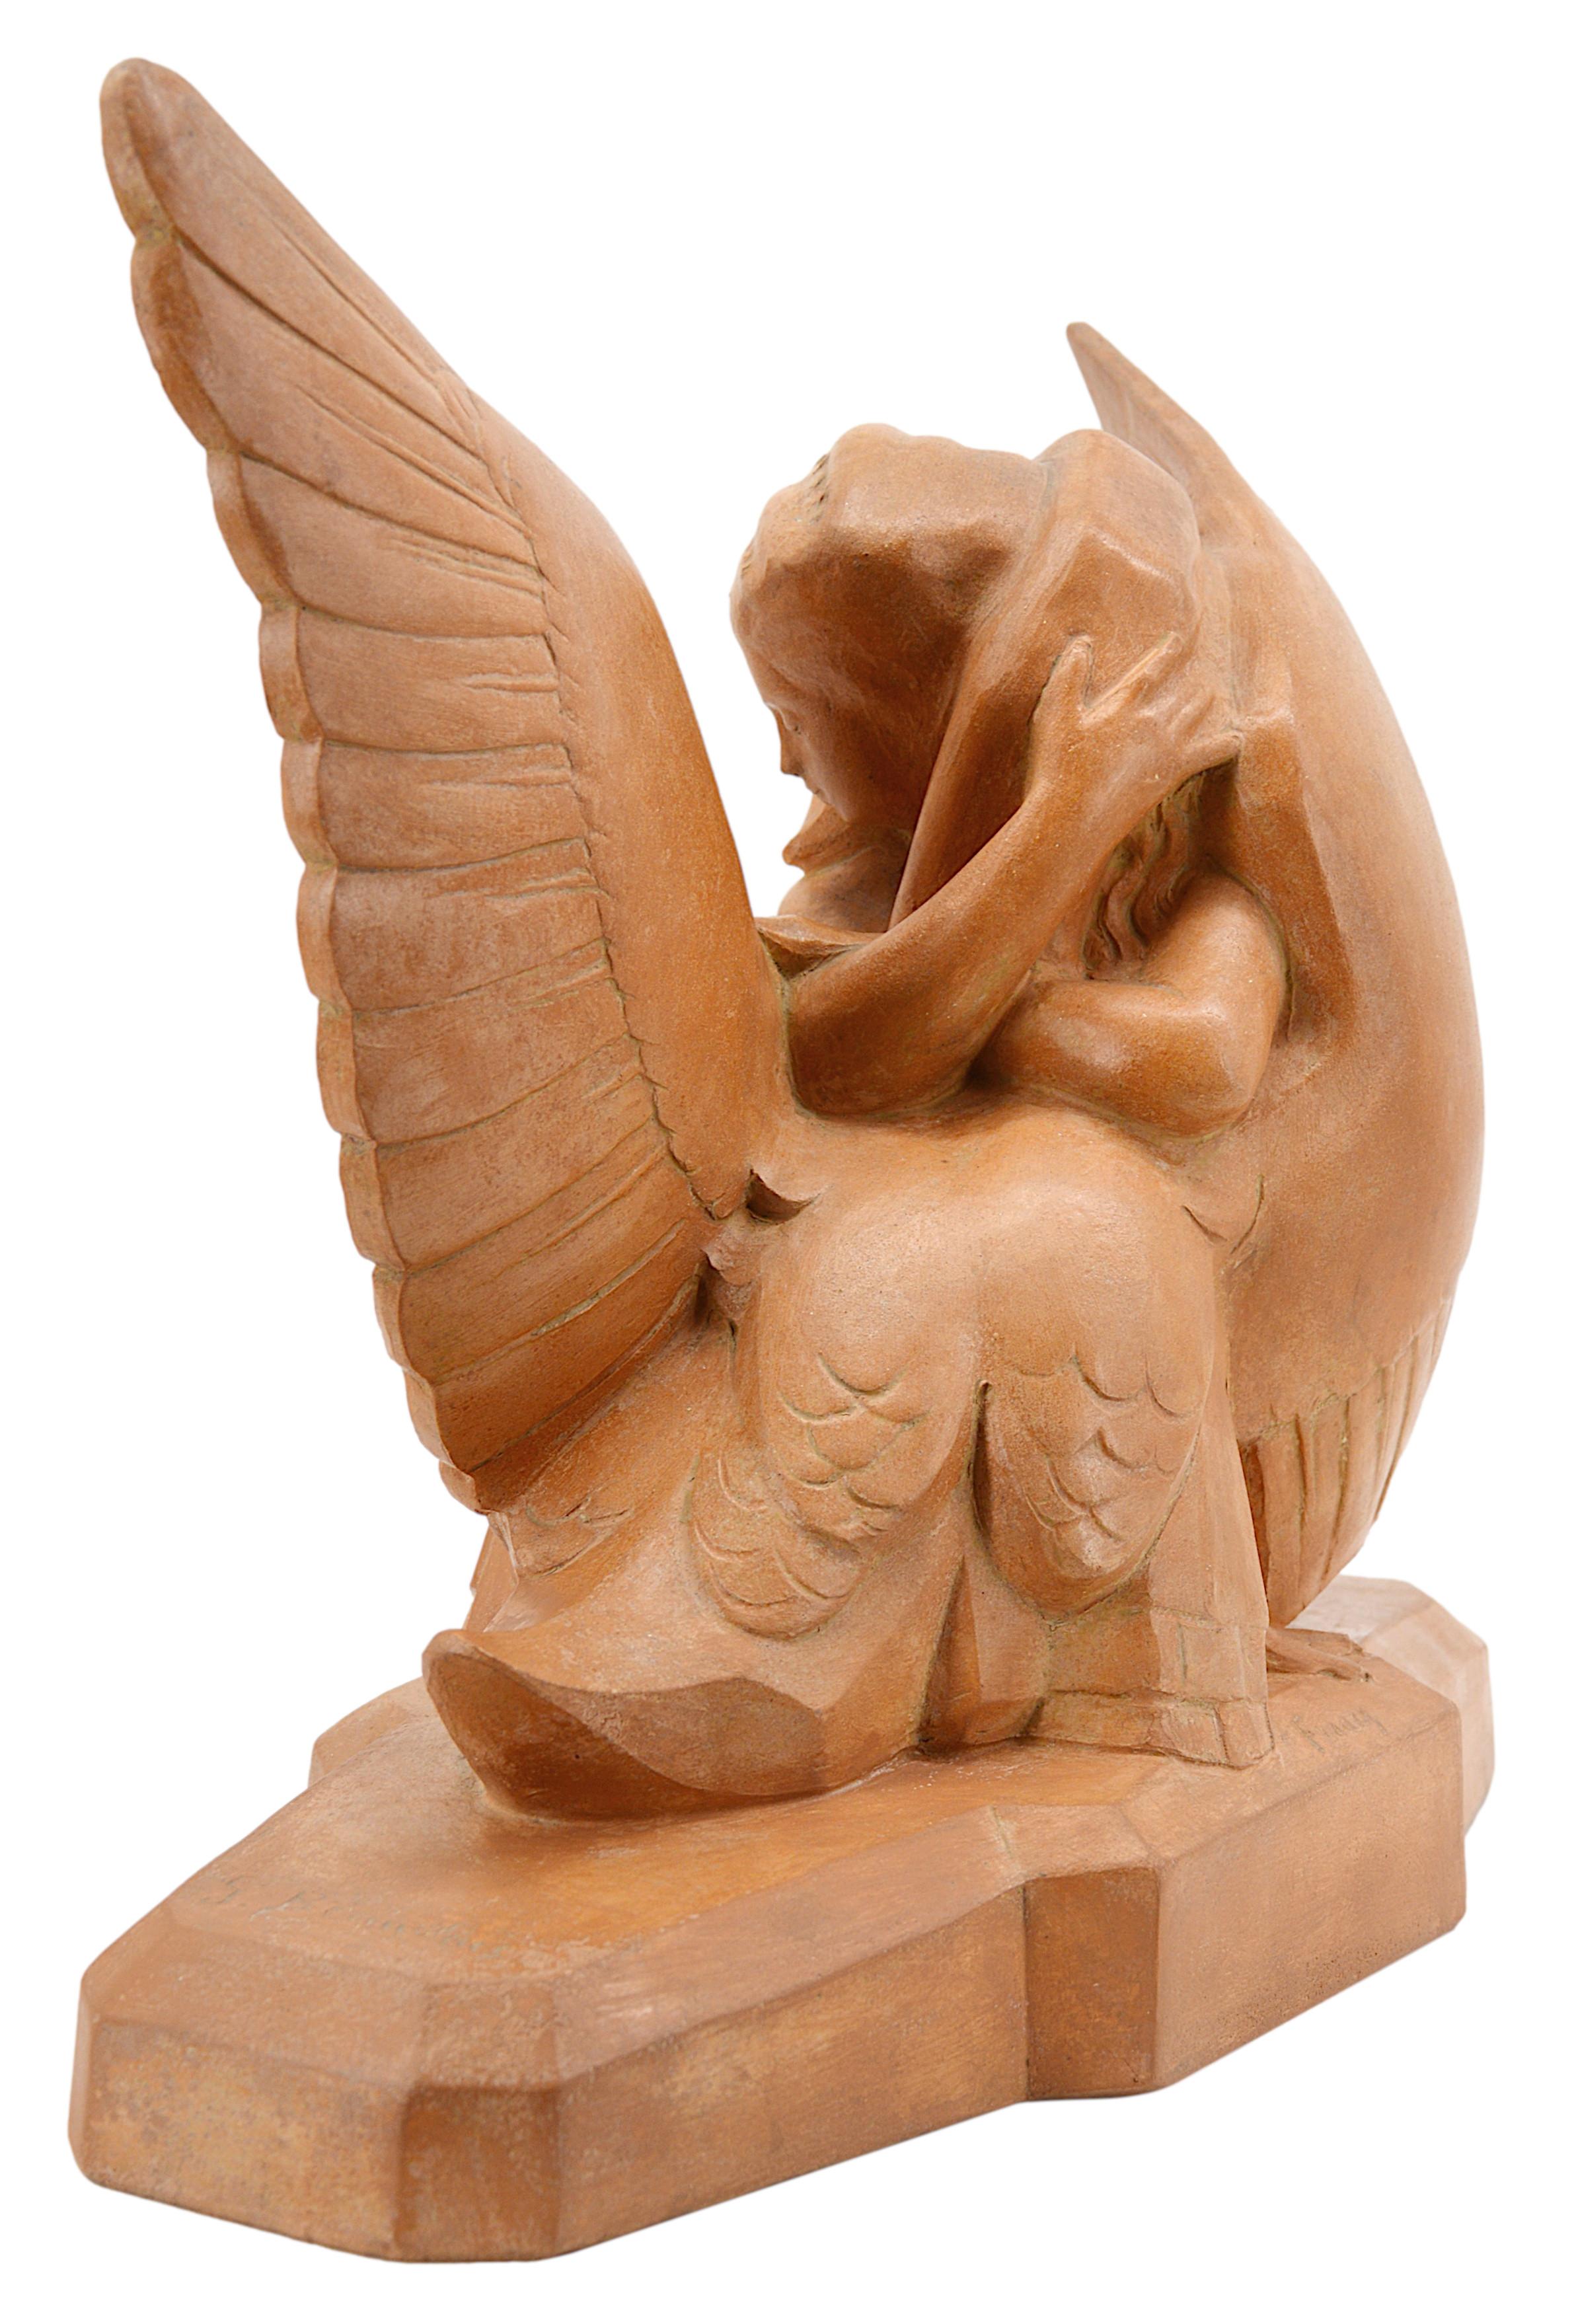 Gabriel Beauvais French Art Deco Terracotta Sculpture Leda and the Swan, 1930s For Sale 1